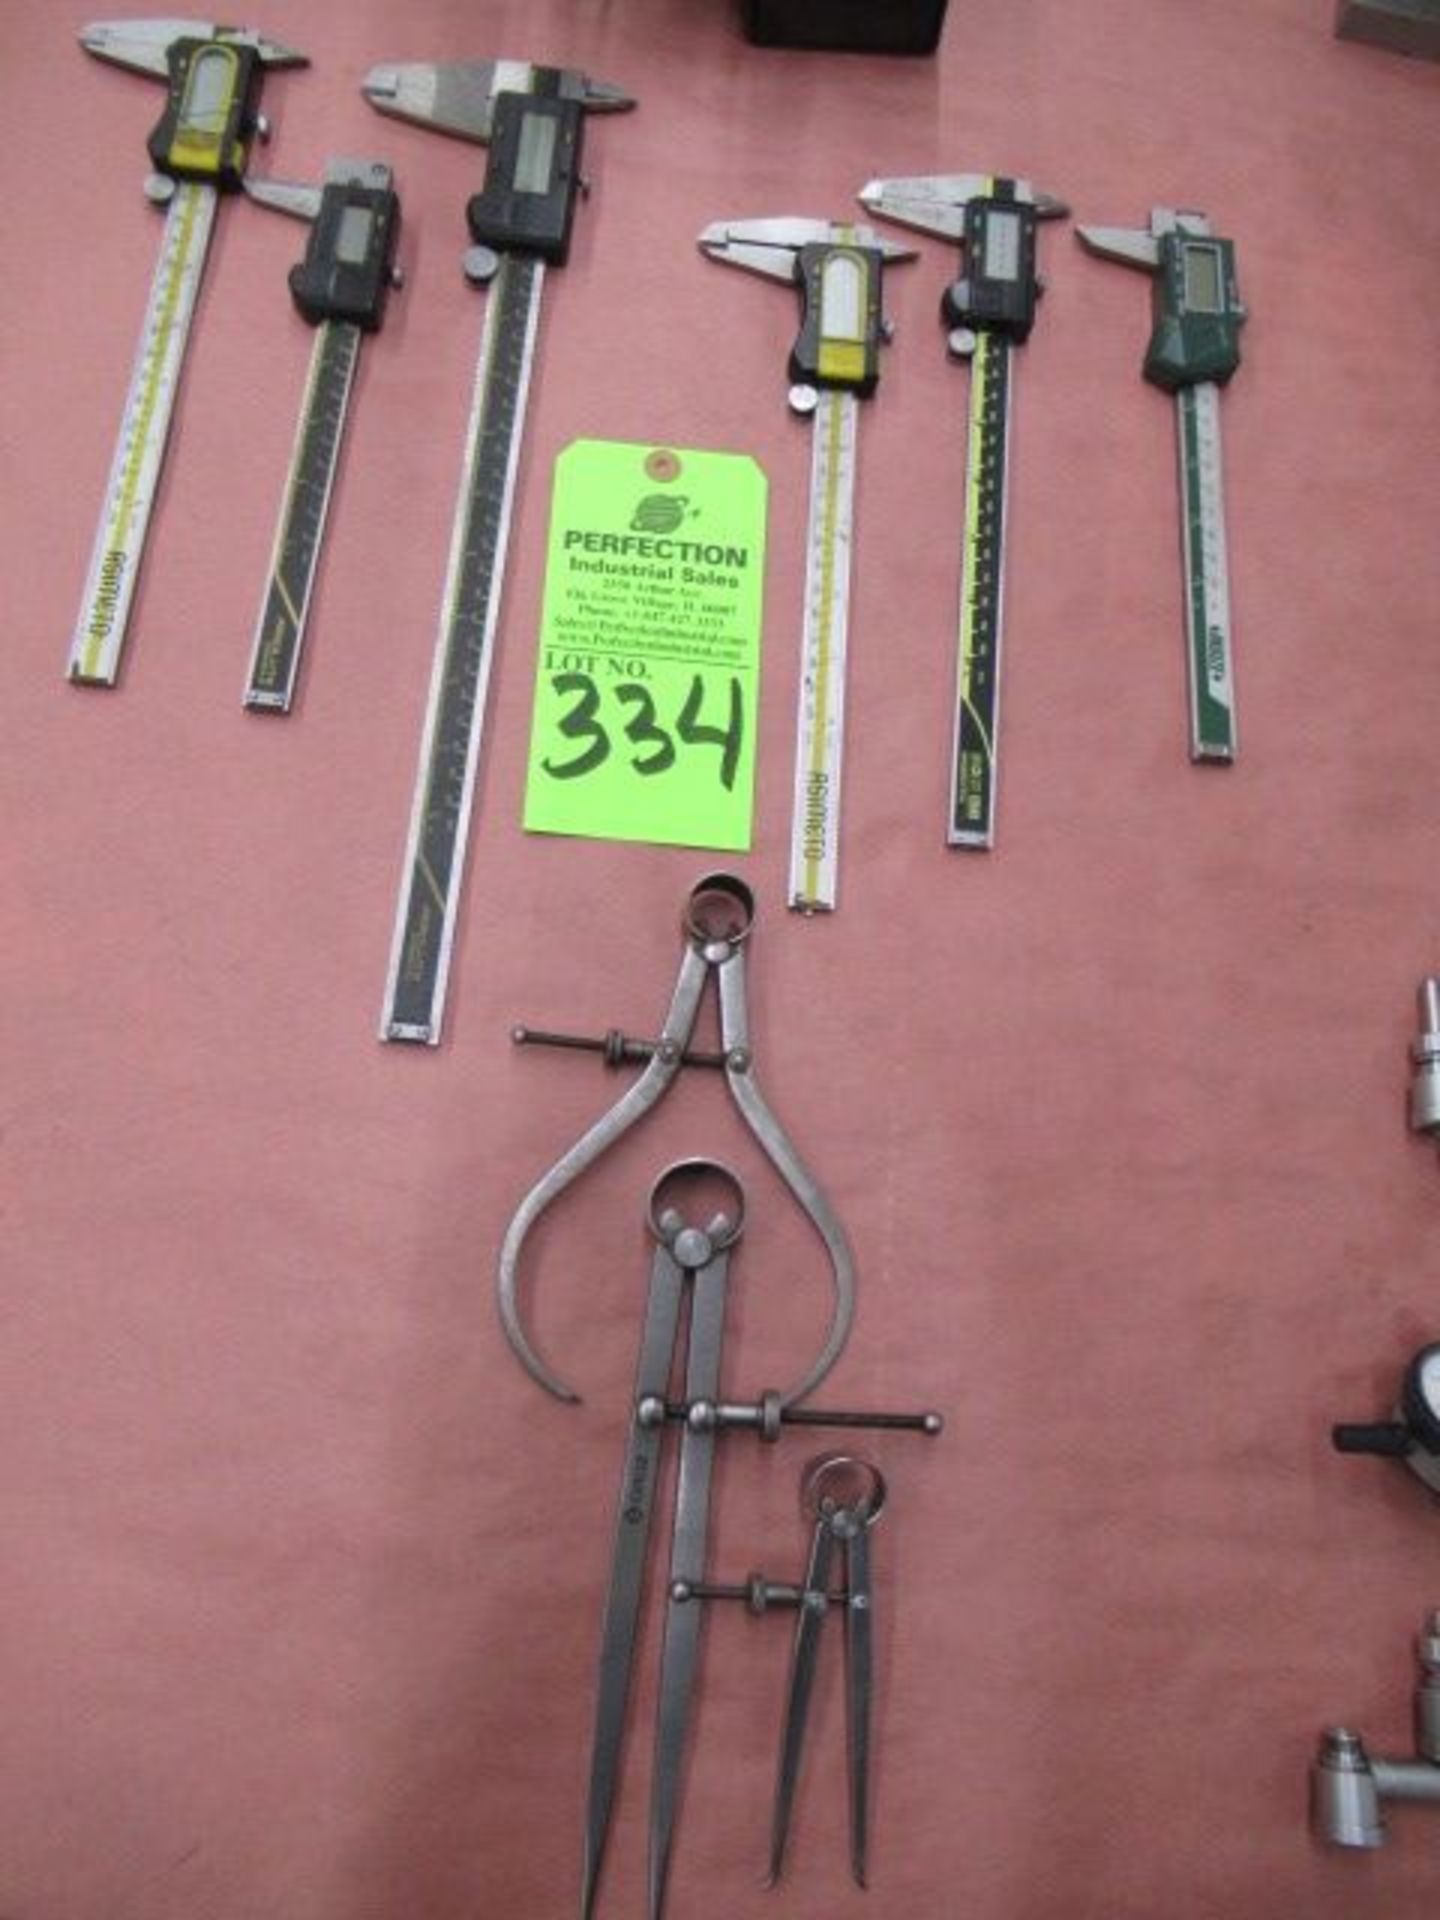 Lot. 6 Calipers & 3 Reference Tools - Image 2 of 2